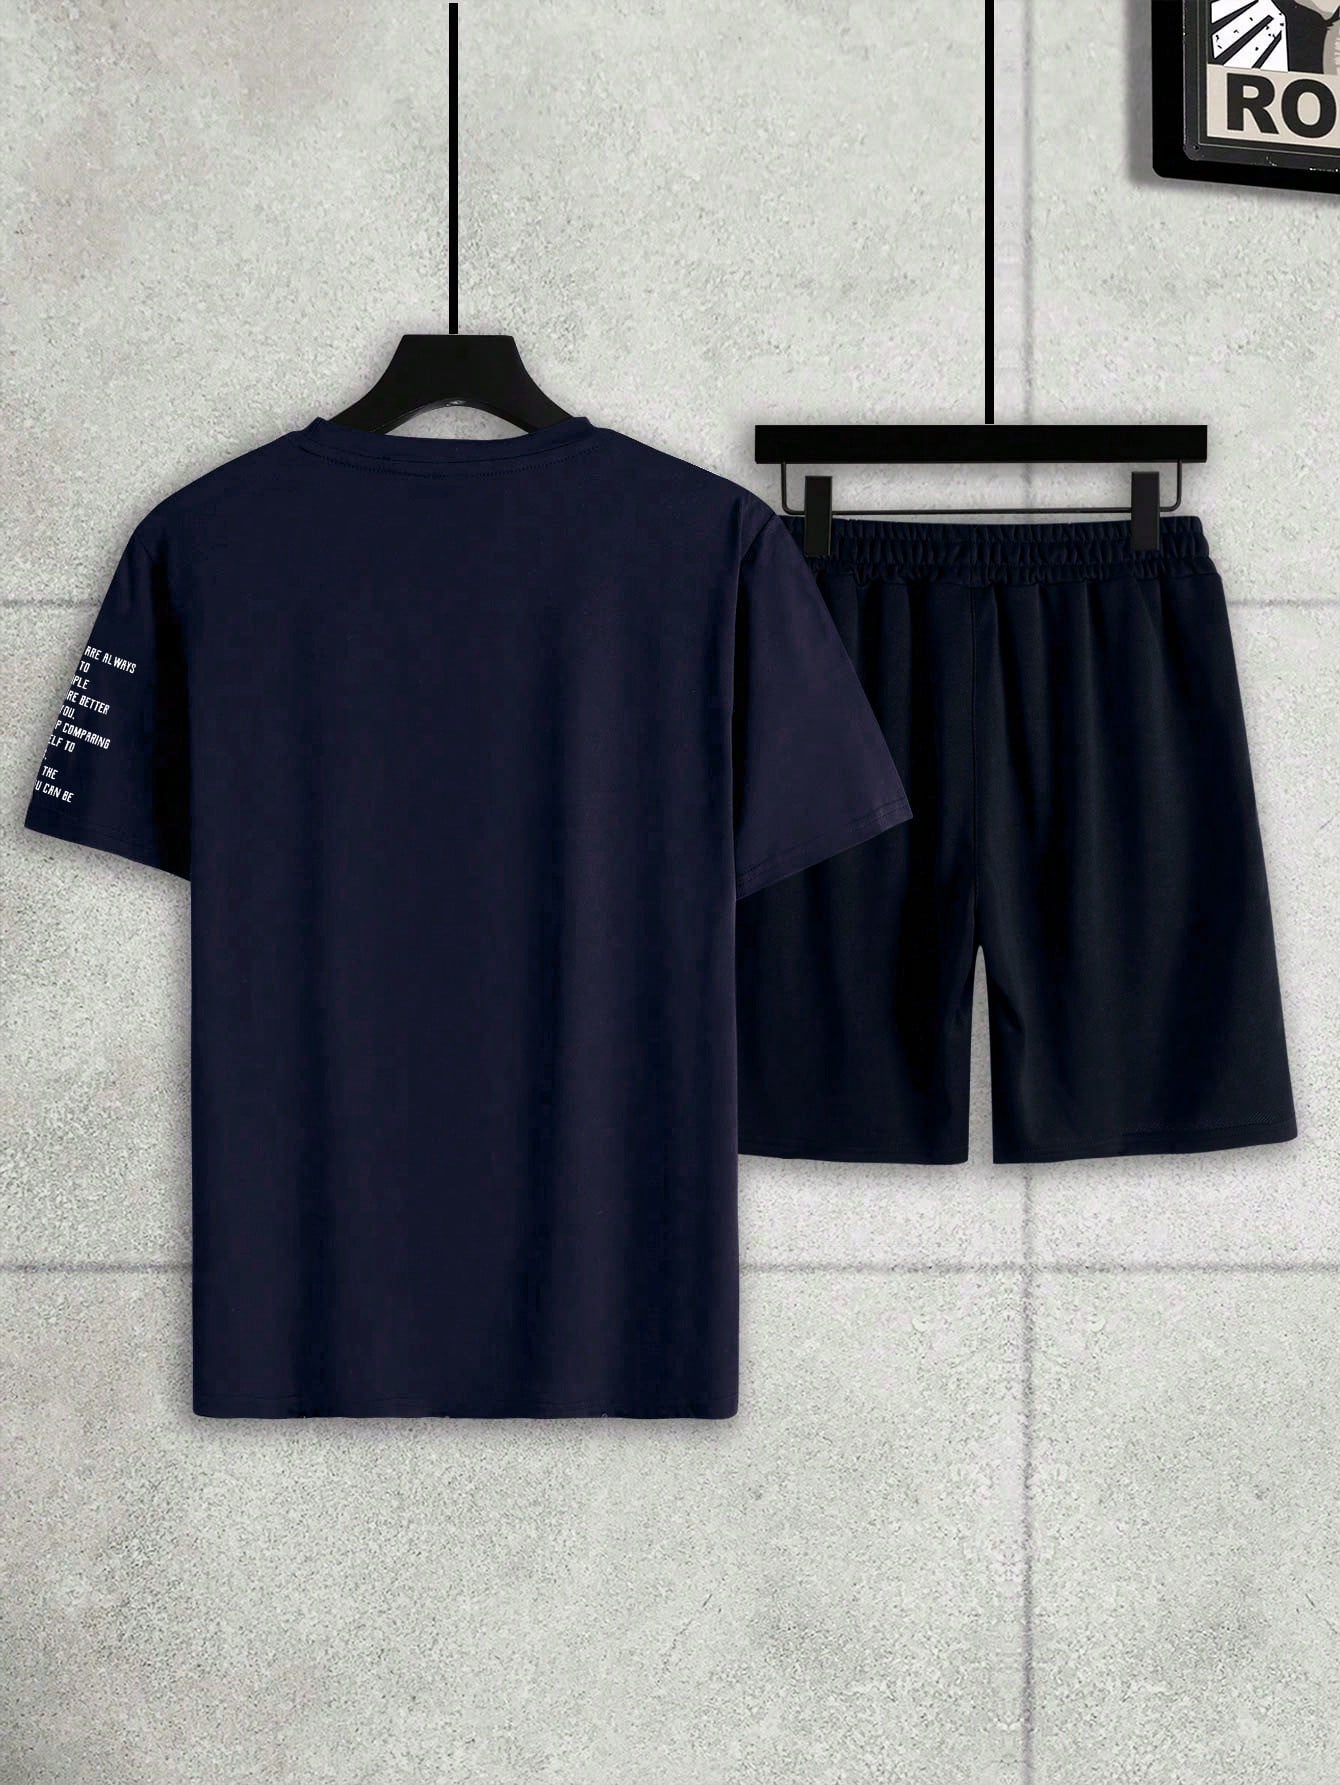 Men's Sporty Printed T-Shirt and Shorts 2 Piece Set